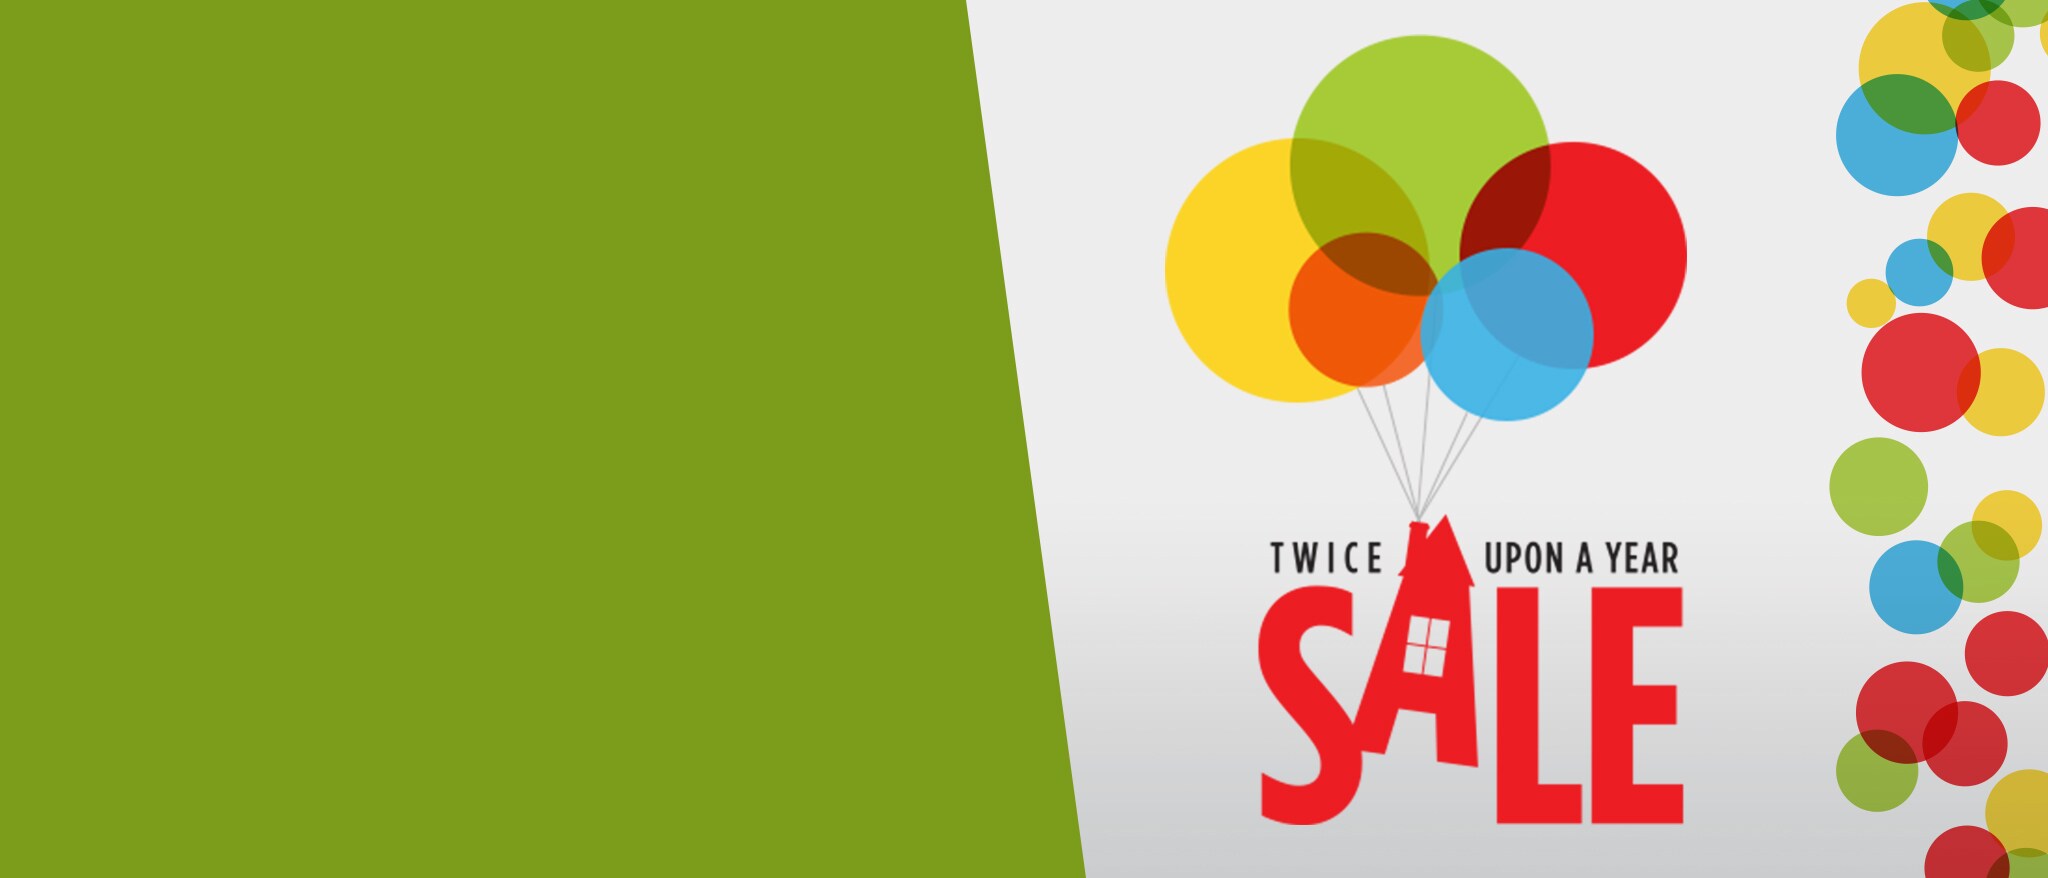 Hero - shopDisney - Twice Upon a Year Sale Extra 50%/Up to 40% 5/29-5/31